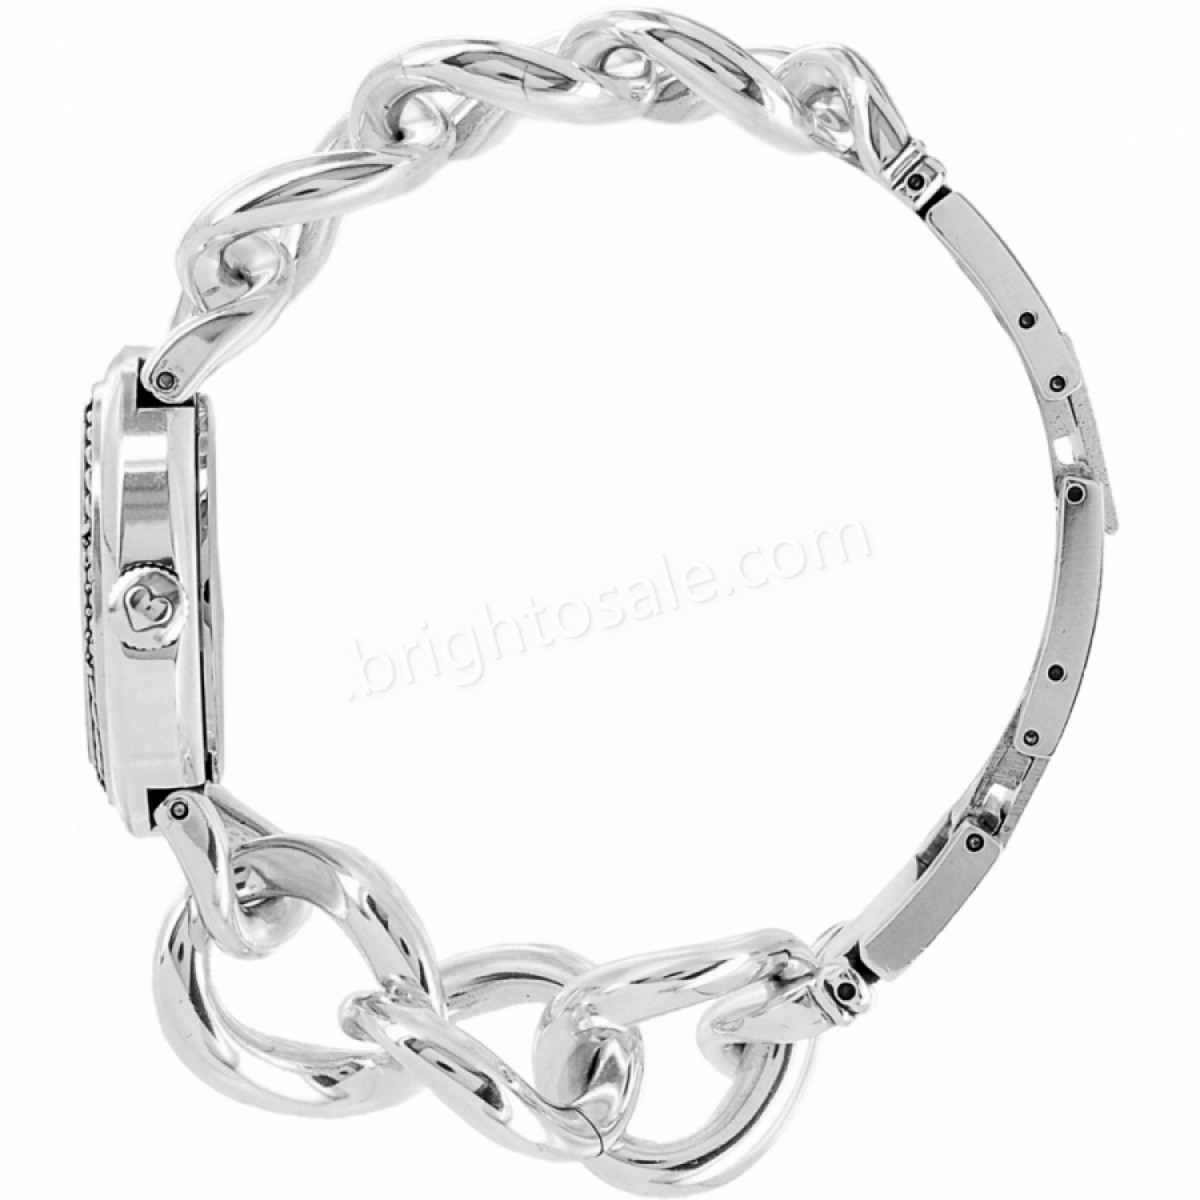 Brighton Collectibles & Online Discount Neptune's Rings Rope Bangle Set - -1